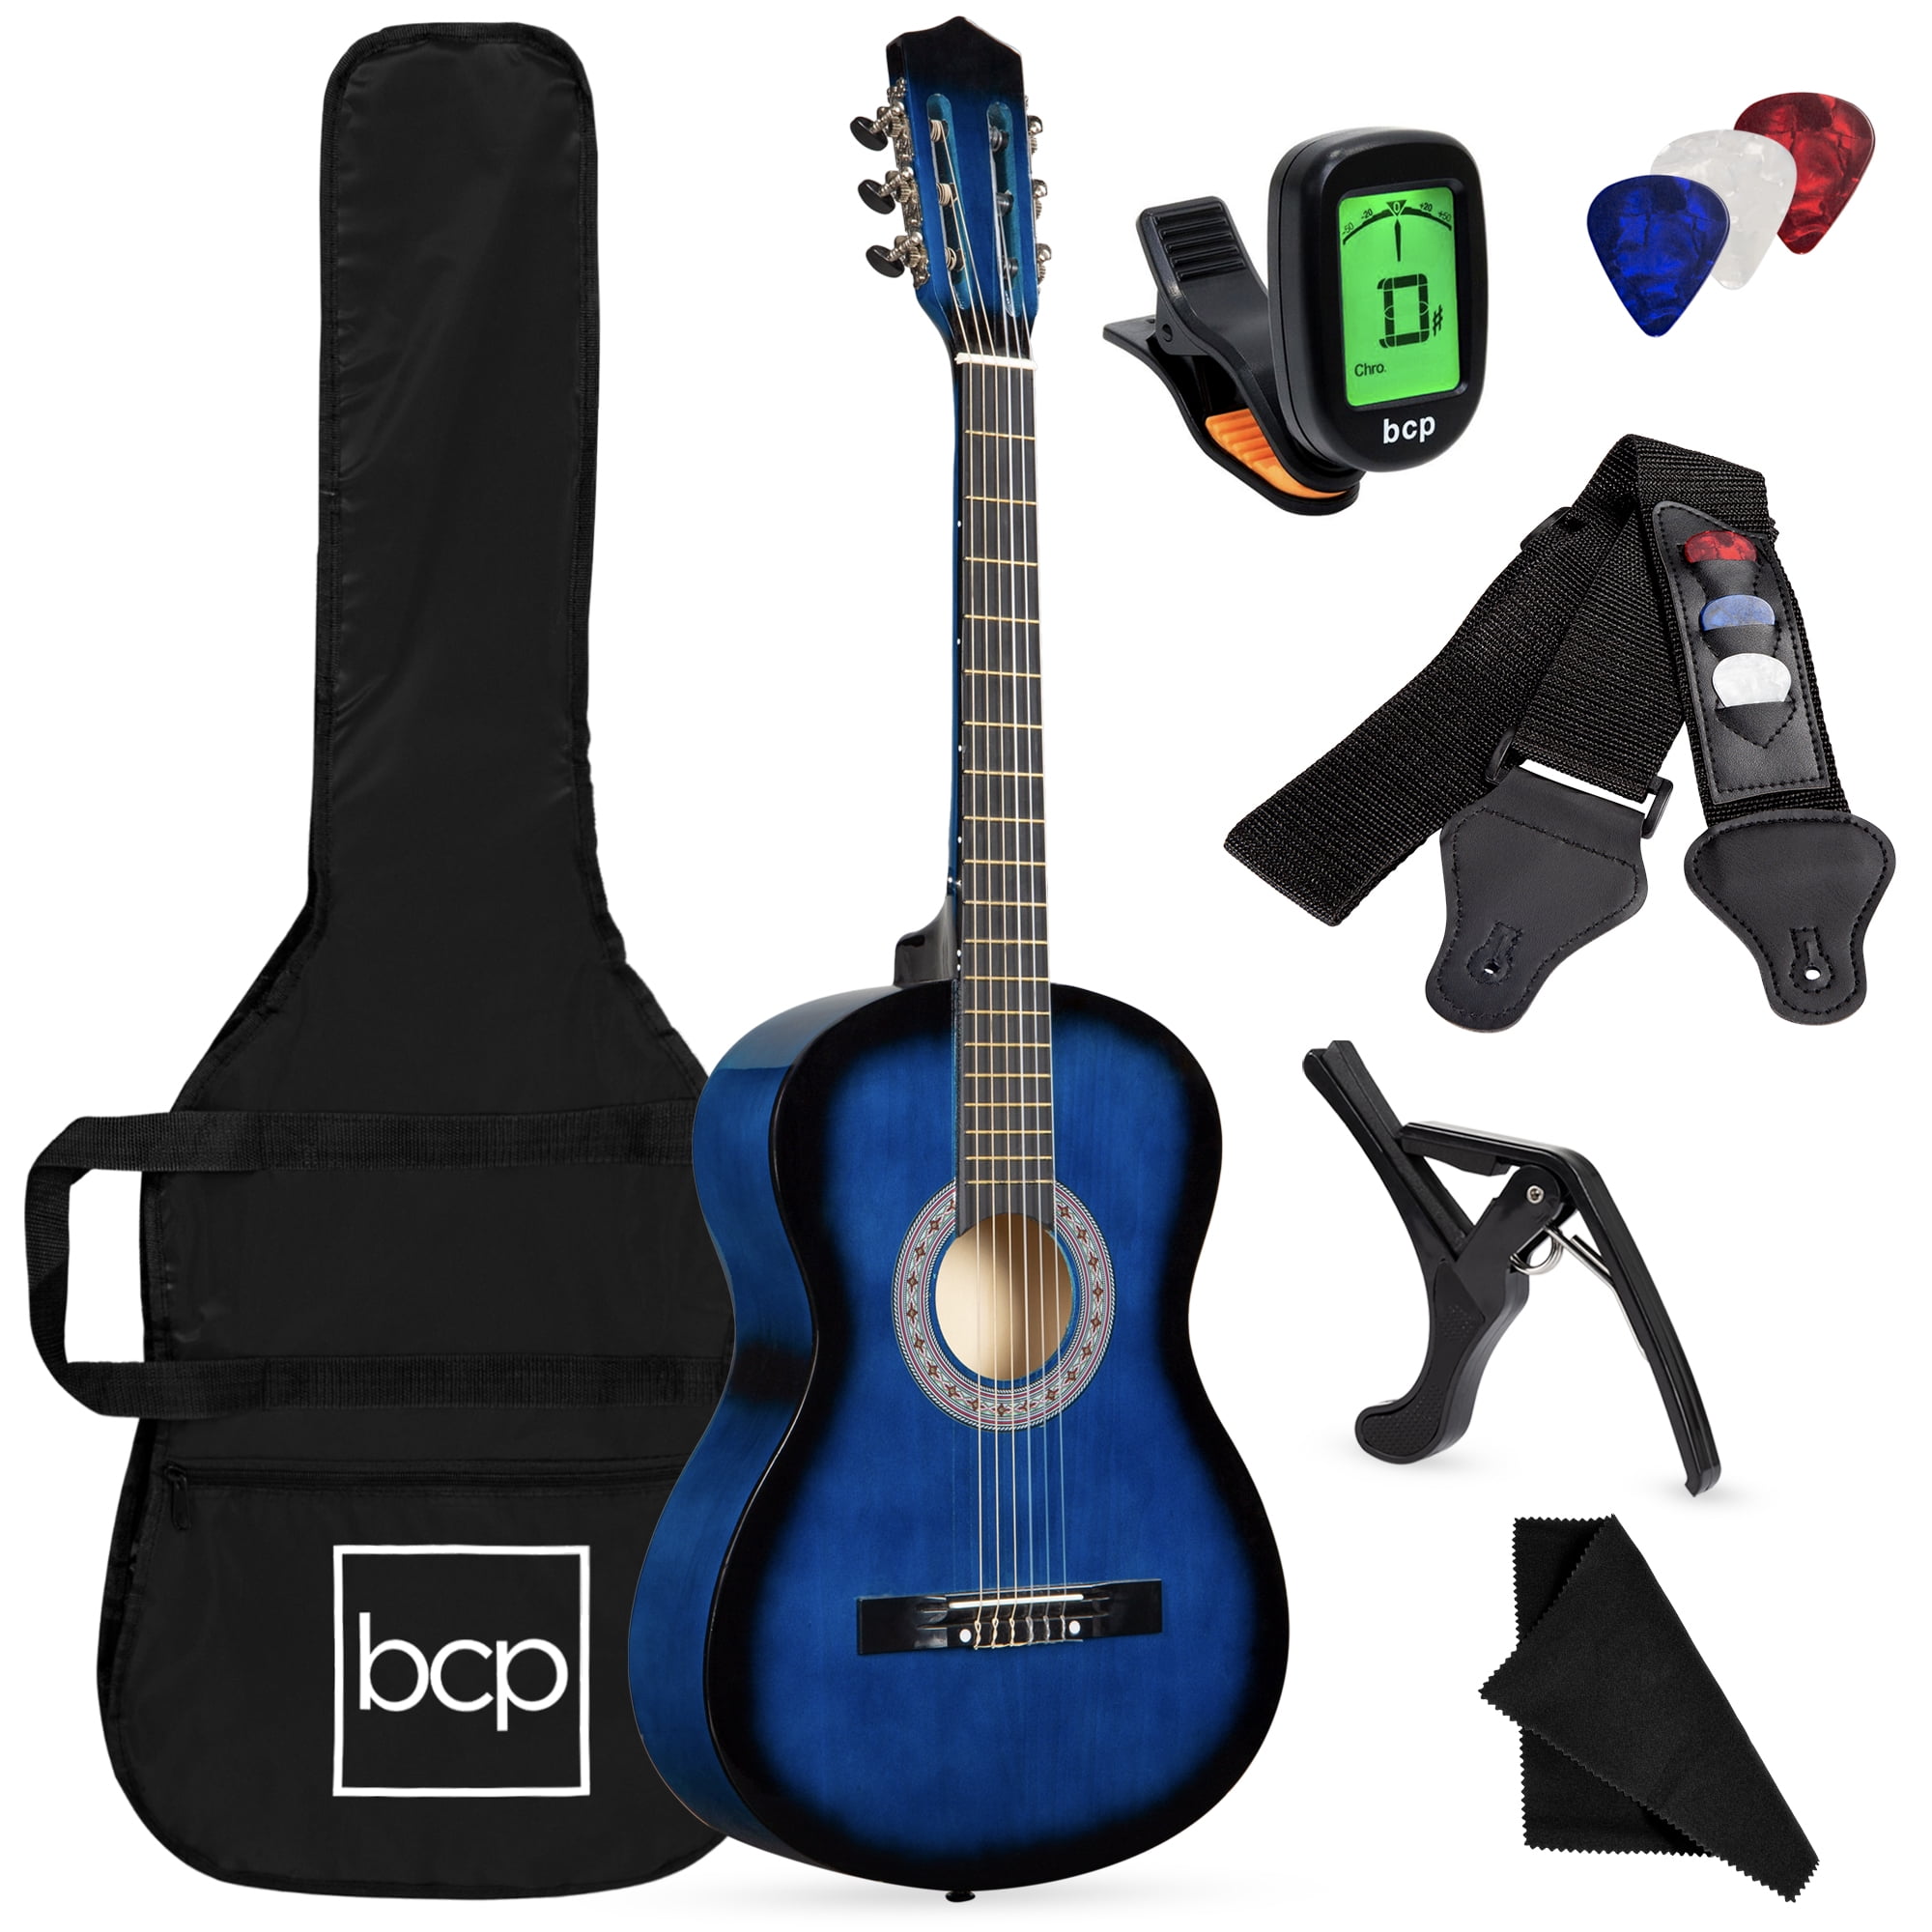 ADM Full Size Classical Nylon Strings Acoustic Kids Guitar with Gig Bag E-tuner Footstool Student Beginner Guitar Kits 